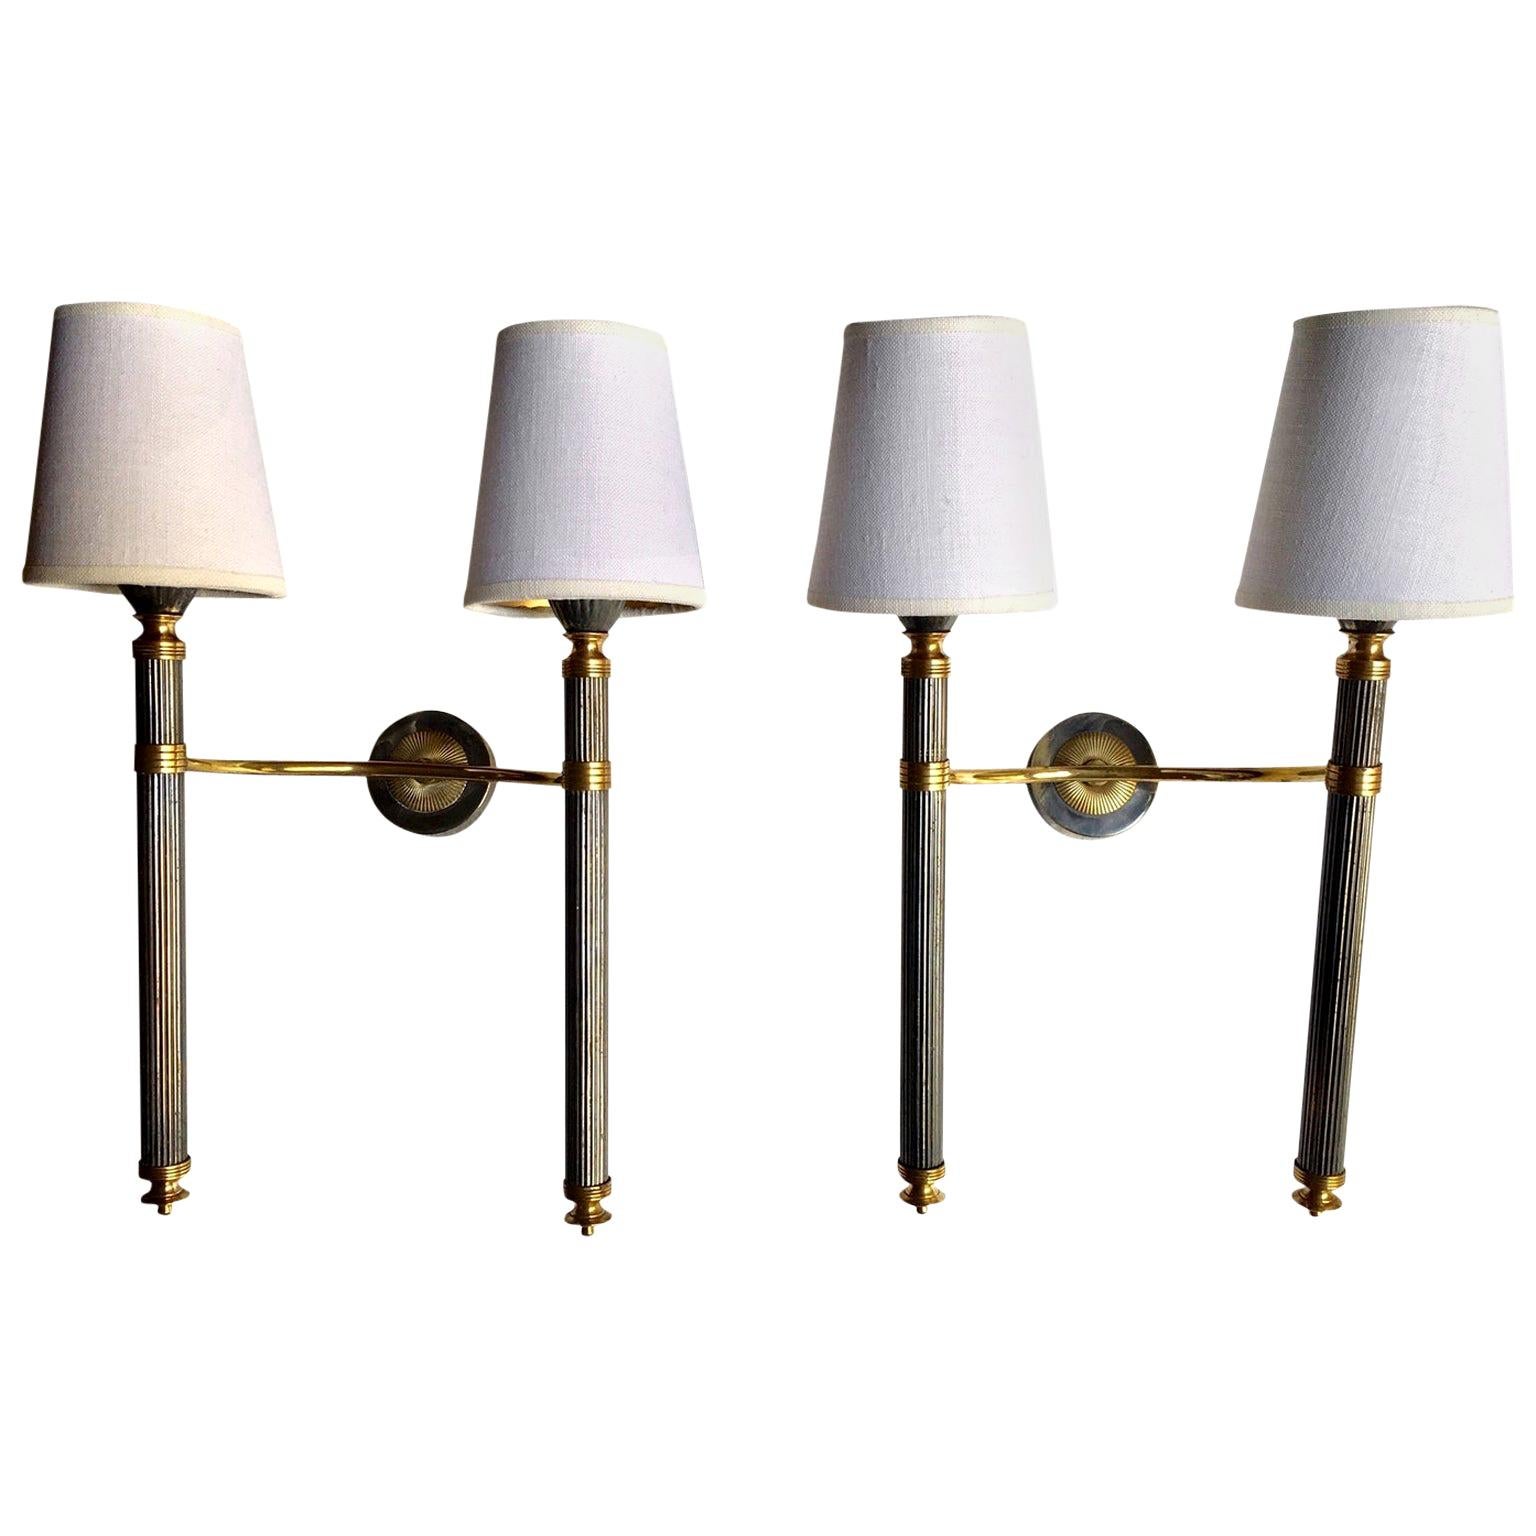 Pair of Midcentury Patinated Brass Double Wall Sconces by Lunel